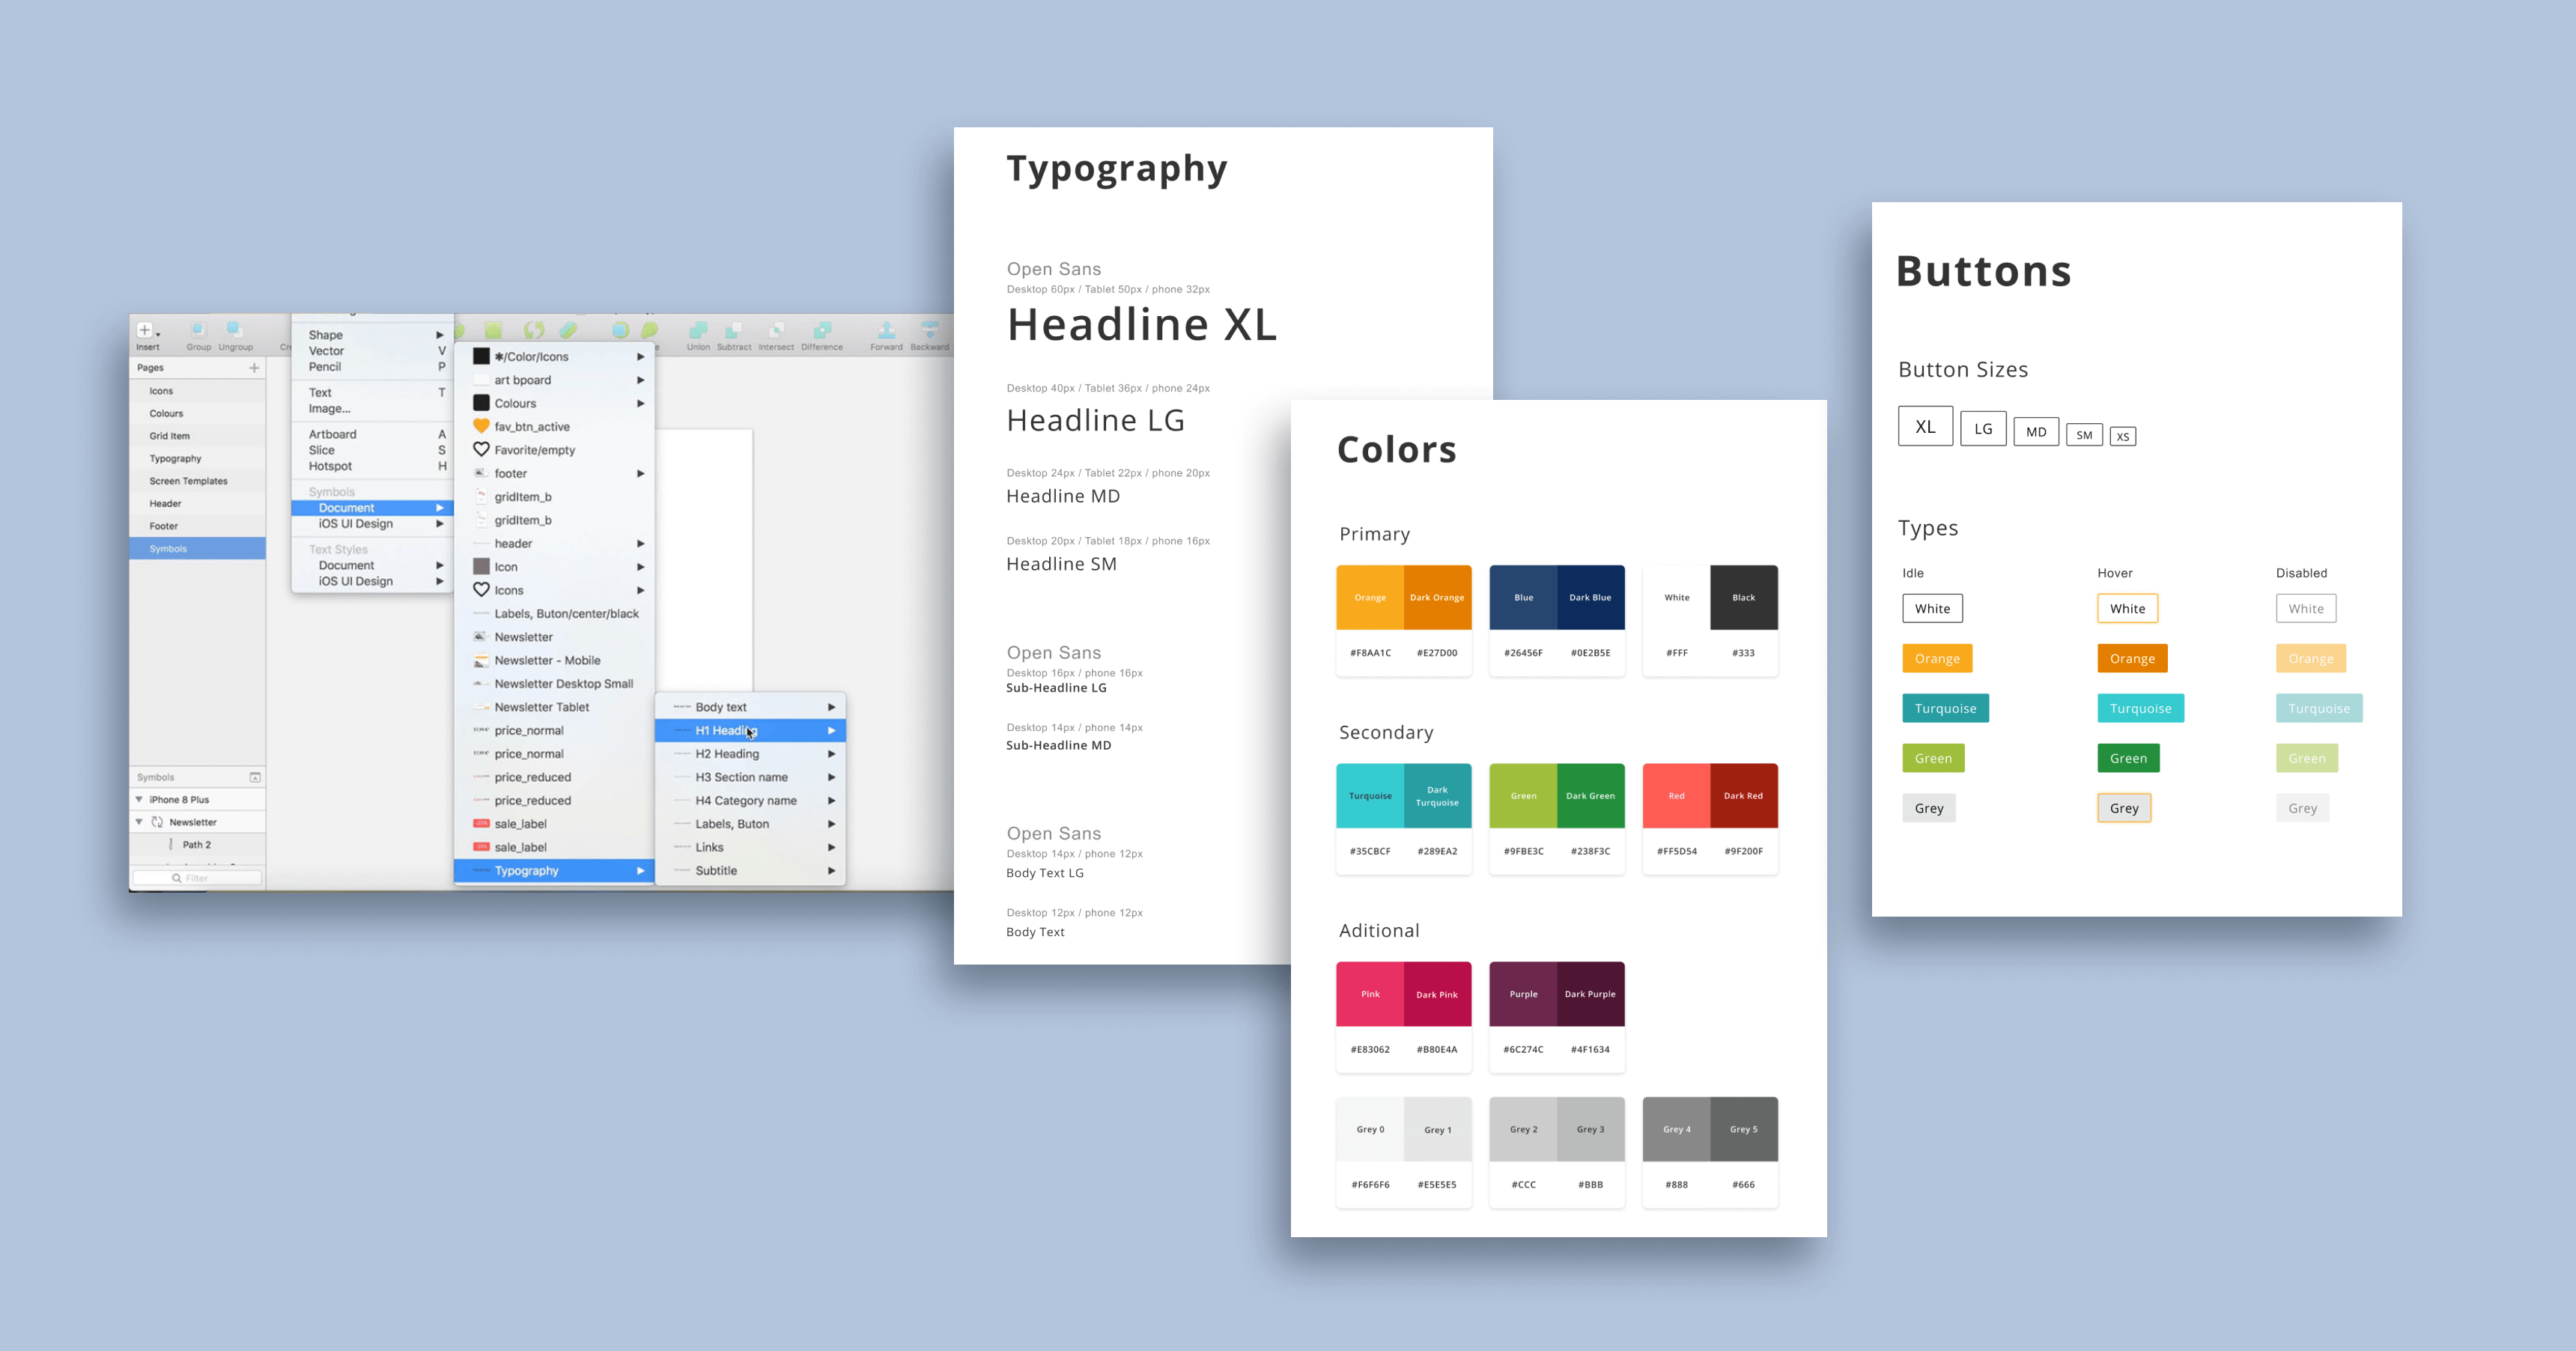 Fragments of the design library in Sketch.